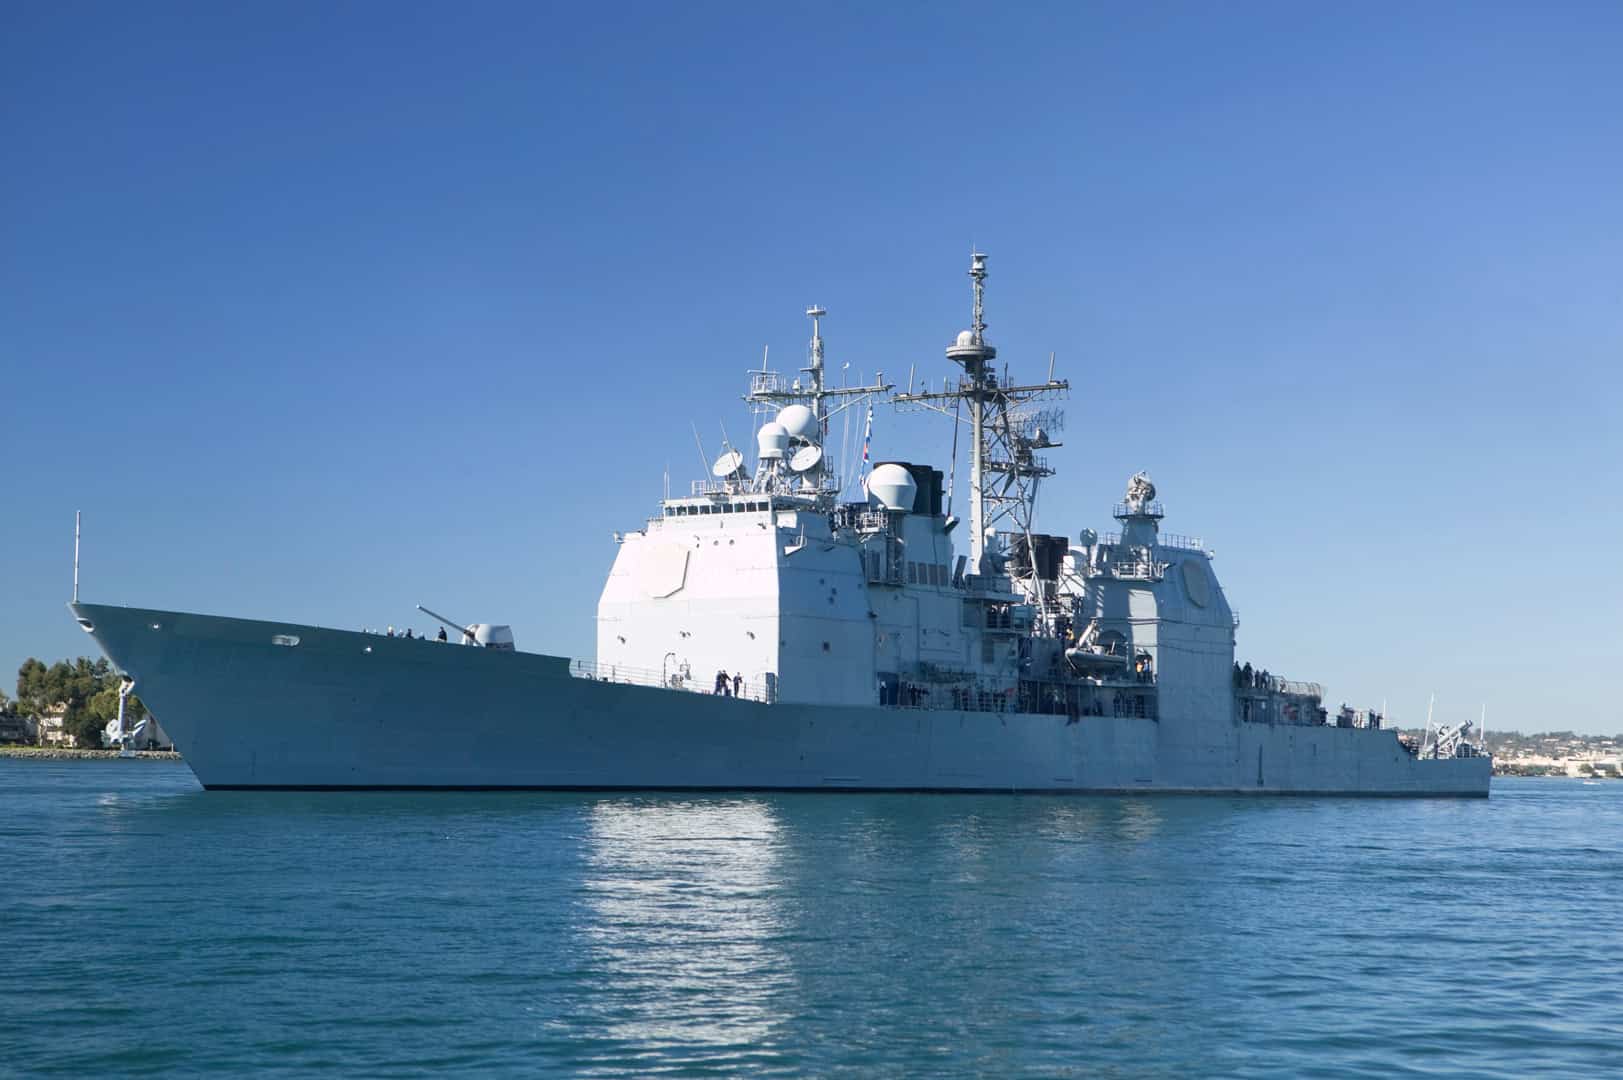 Azure Summit Technology Secures $5M Second Delivery Award to Provide RF Transceivers to the Navy